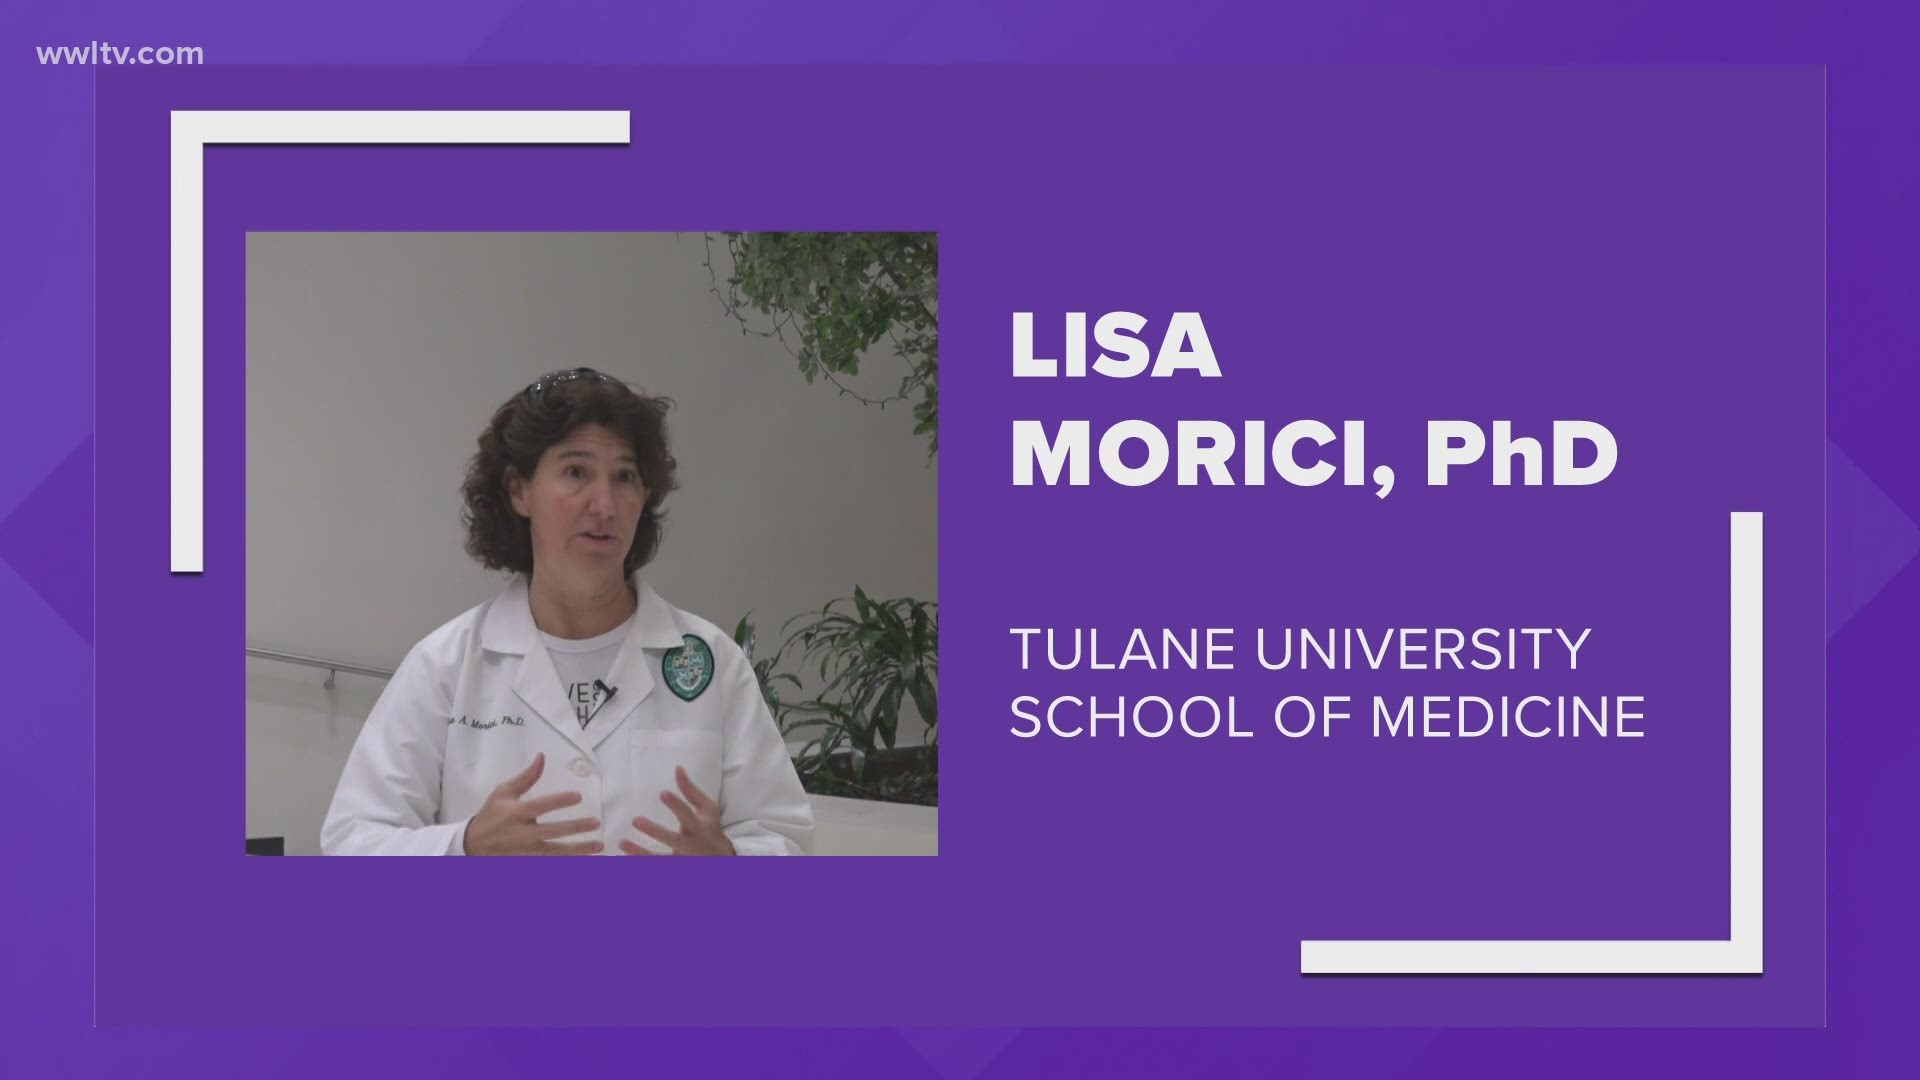 Dr. Lisa Morici of Tulane says the vaccines are amazing and that steps were not cut in producing them.